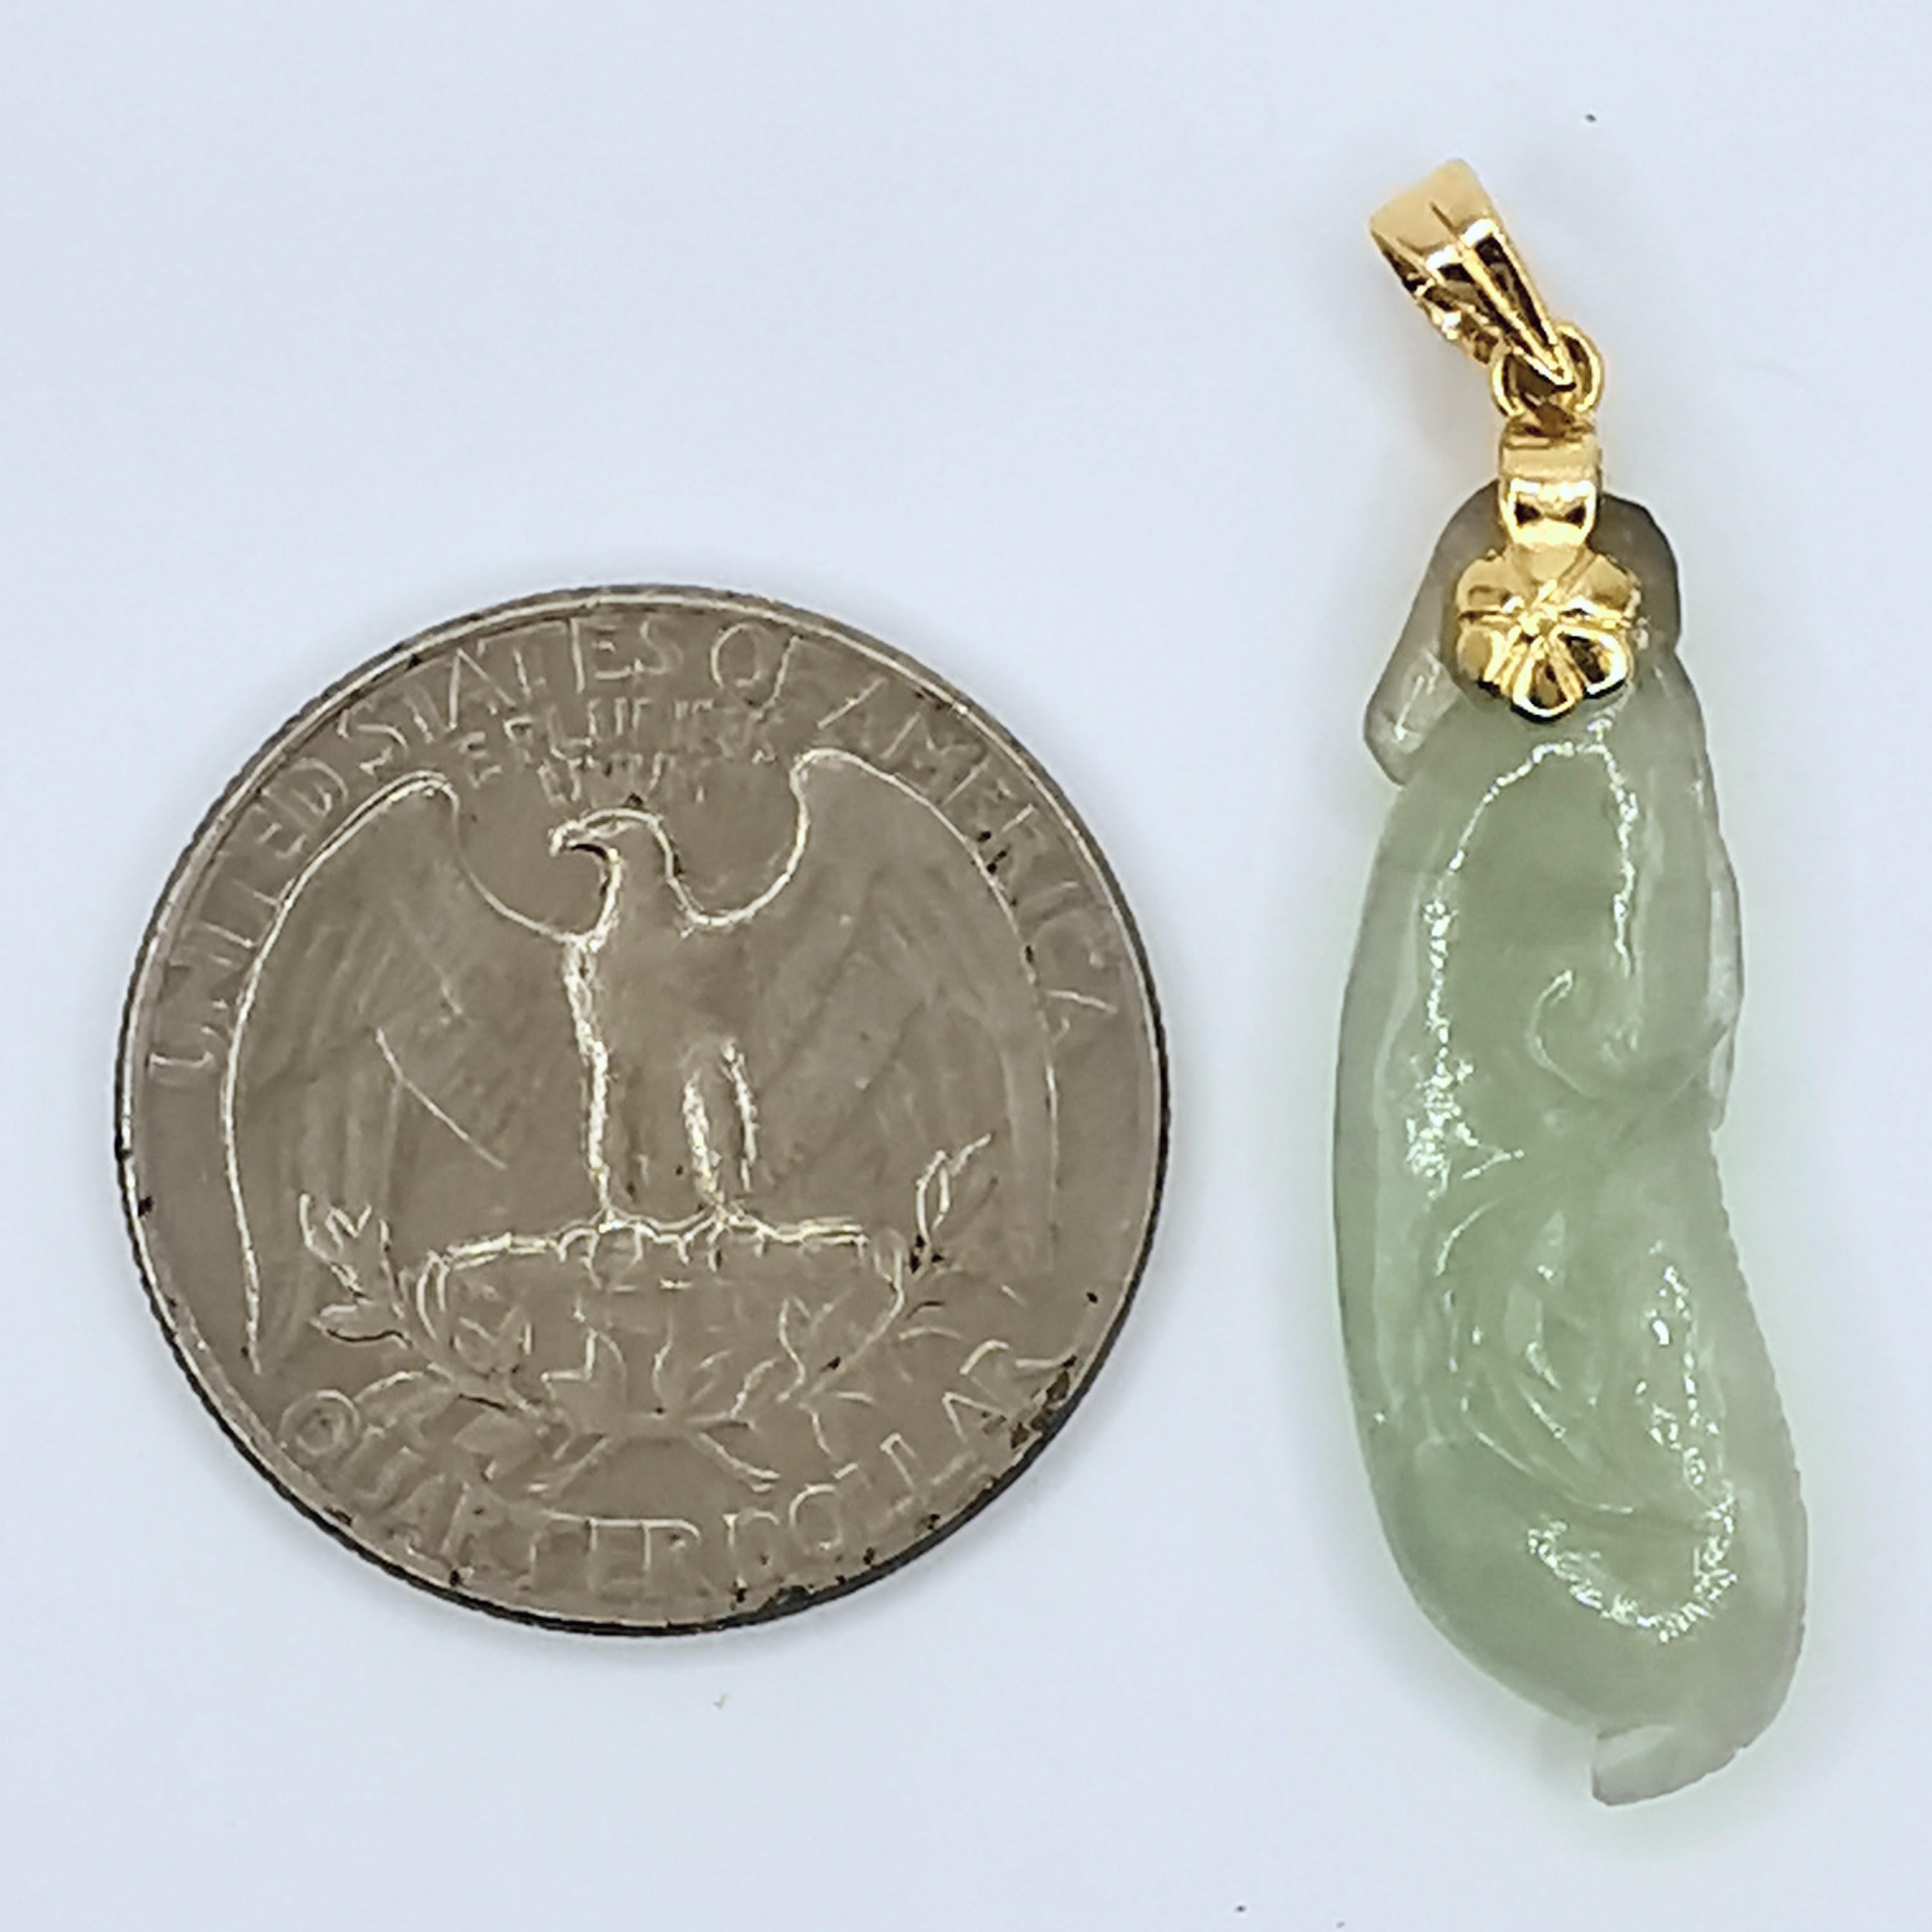 Introducing our stunning Vintage Carved Natural Jadeite Jade and Diamond Pendant Necklace, crafted in yellow gold. The pendant features a natural light green icy jadeite jade, intricately carved with a unique vintage design. The jadeite jade is a